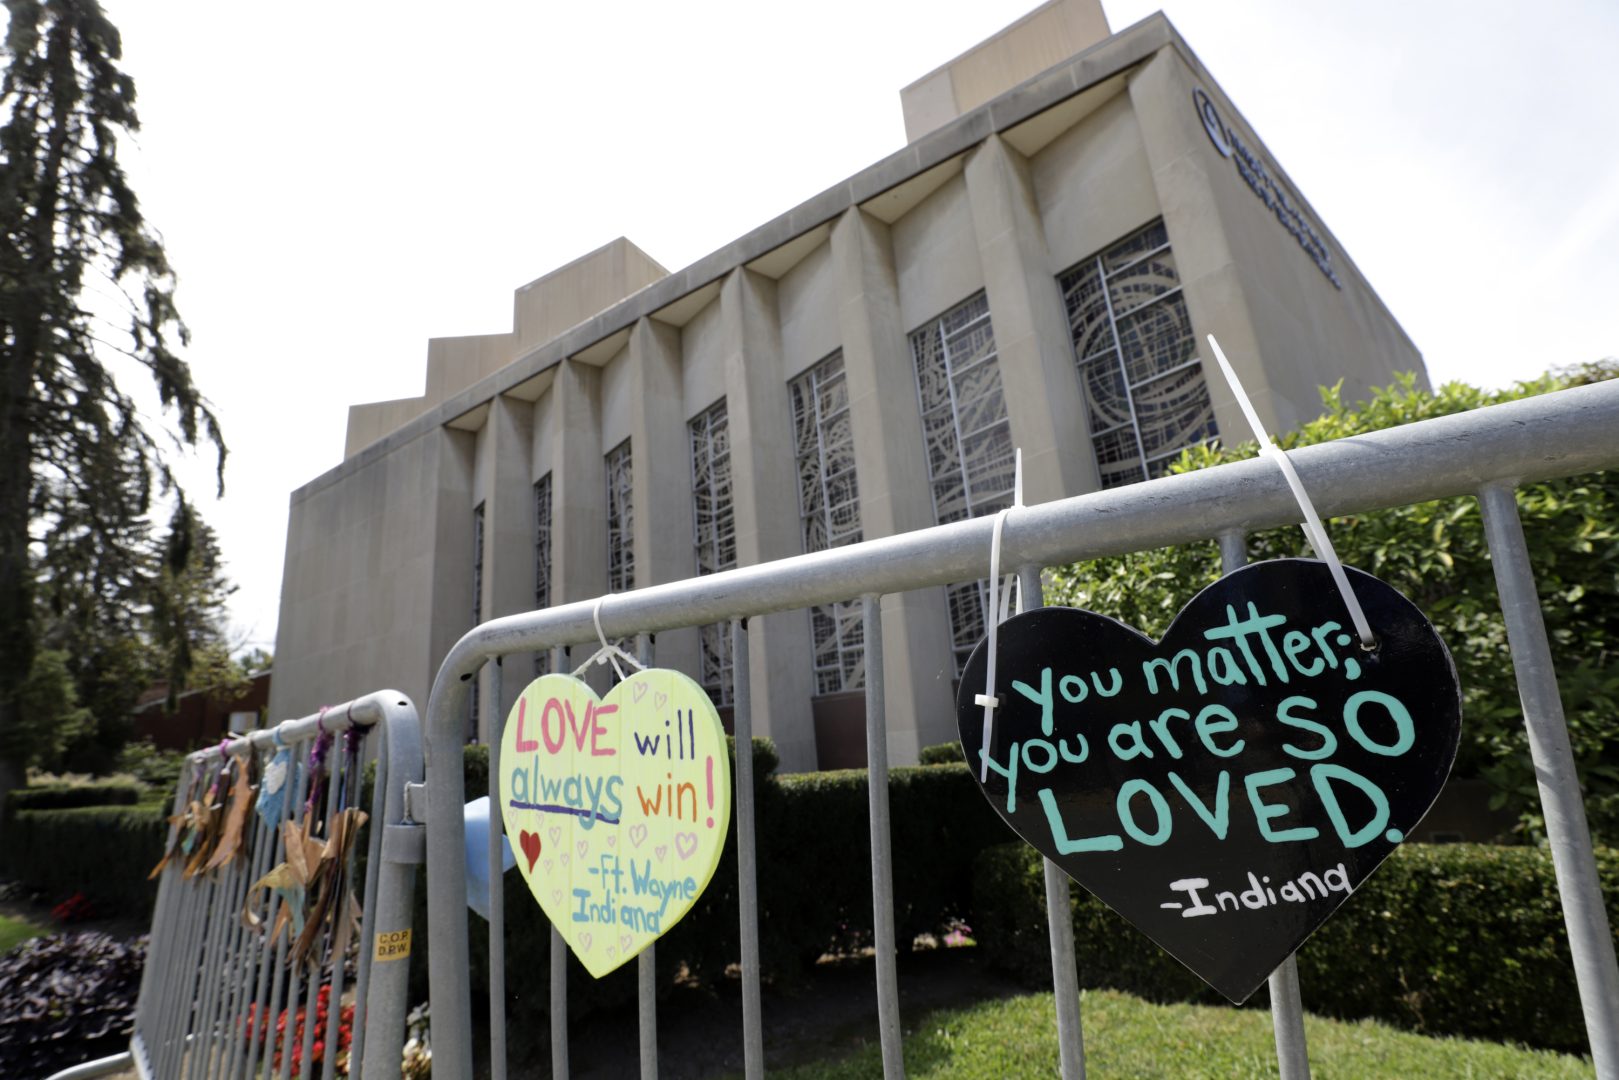 FILE - Signs hang on a fence surrounding the Tree of Life synagogue in Pittsburgh on Sept. 17, 2019.  Prosecutors told a federal judge, Thursday, Dec. 2, 2021,  in a new filing that the Pittsburgh synagogue massacre defendant’s statements at the scene should be allowed for use at trial, in part because concerns about public safety in the immediate aftermath were a valid reason to keep questioning him.  